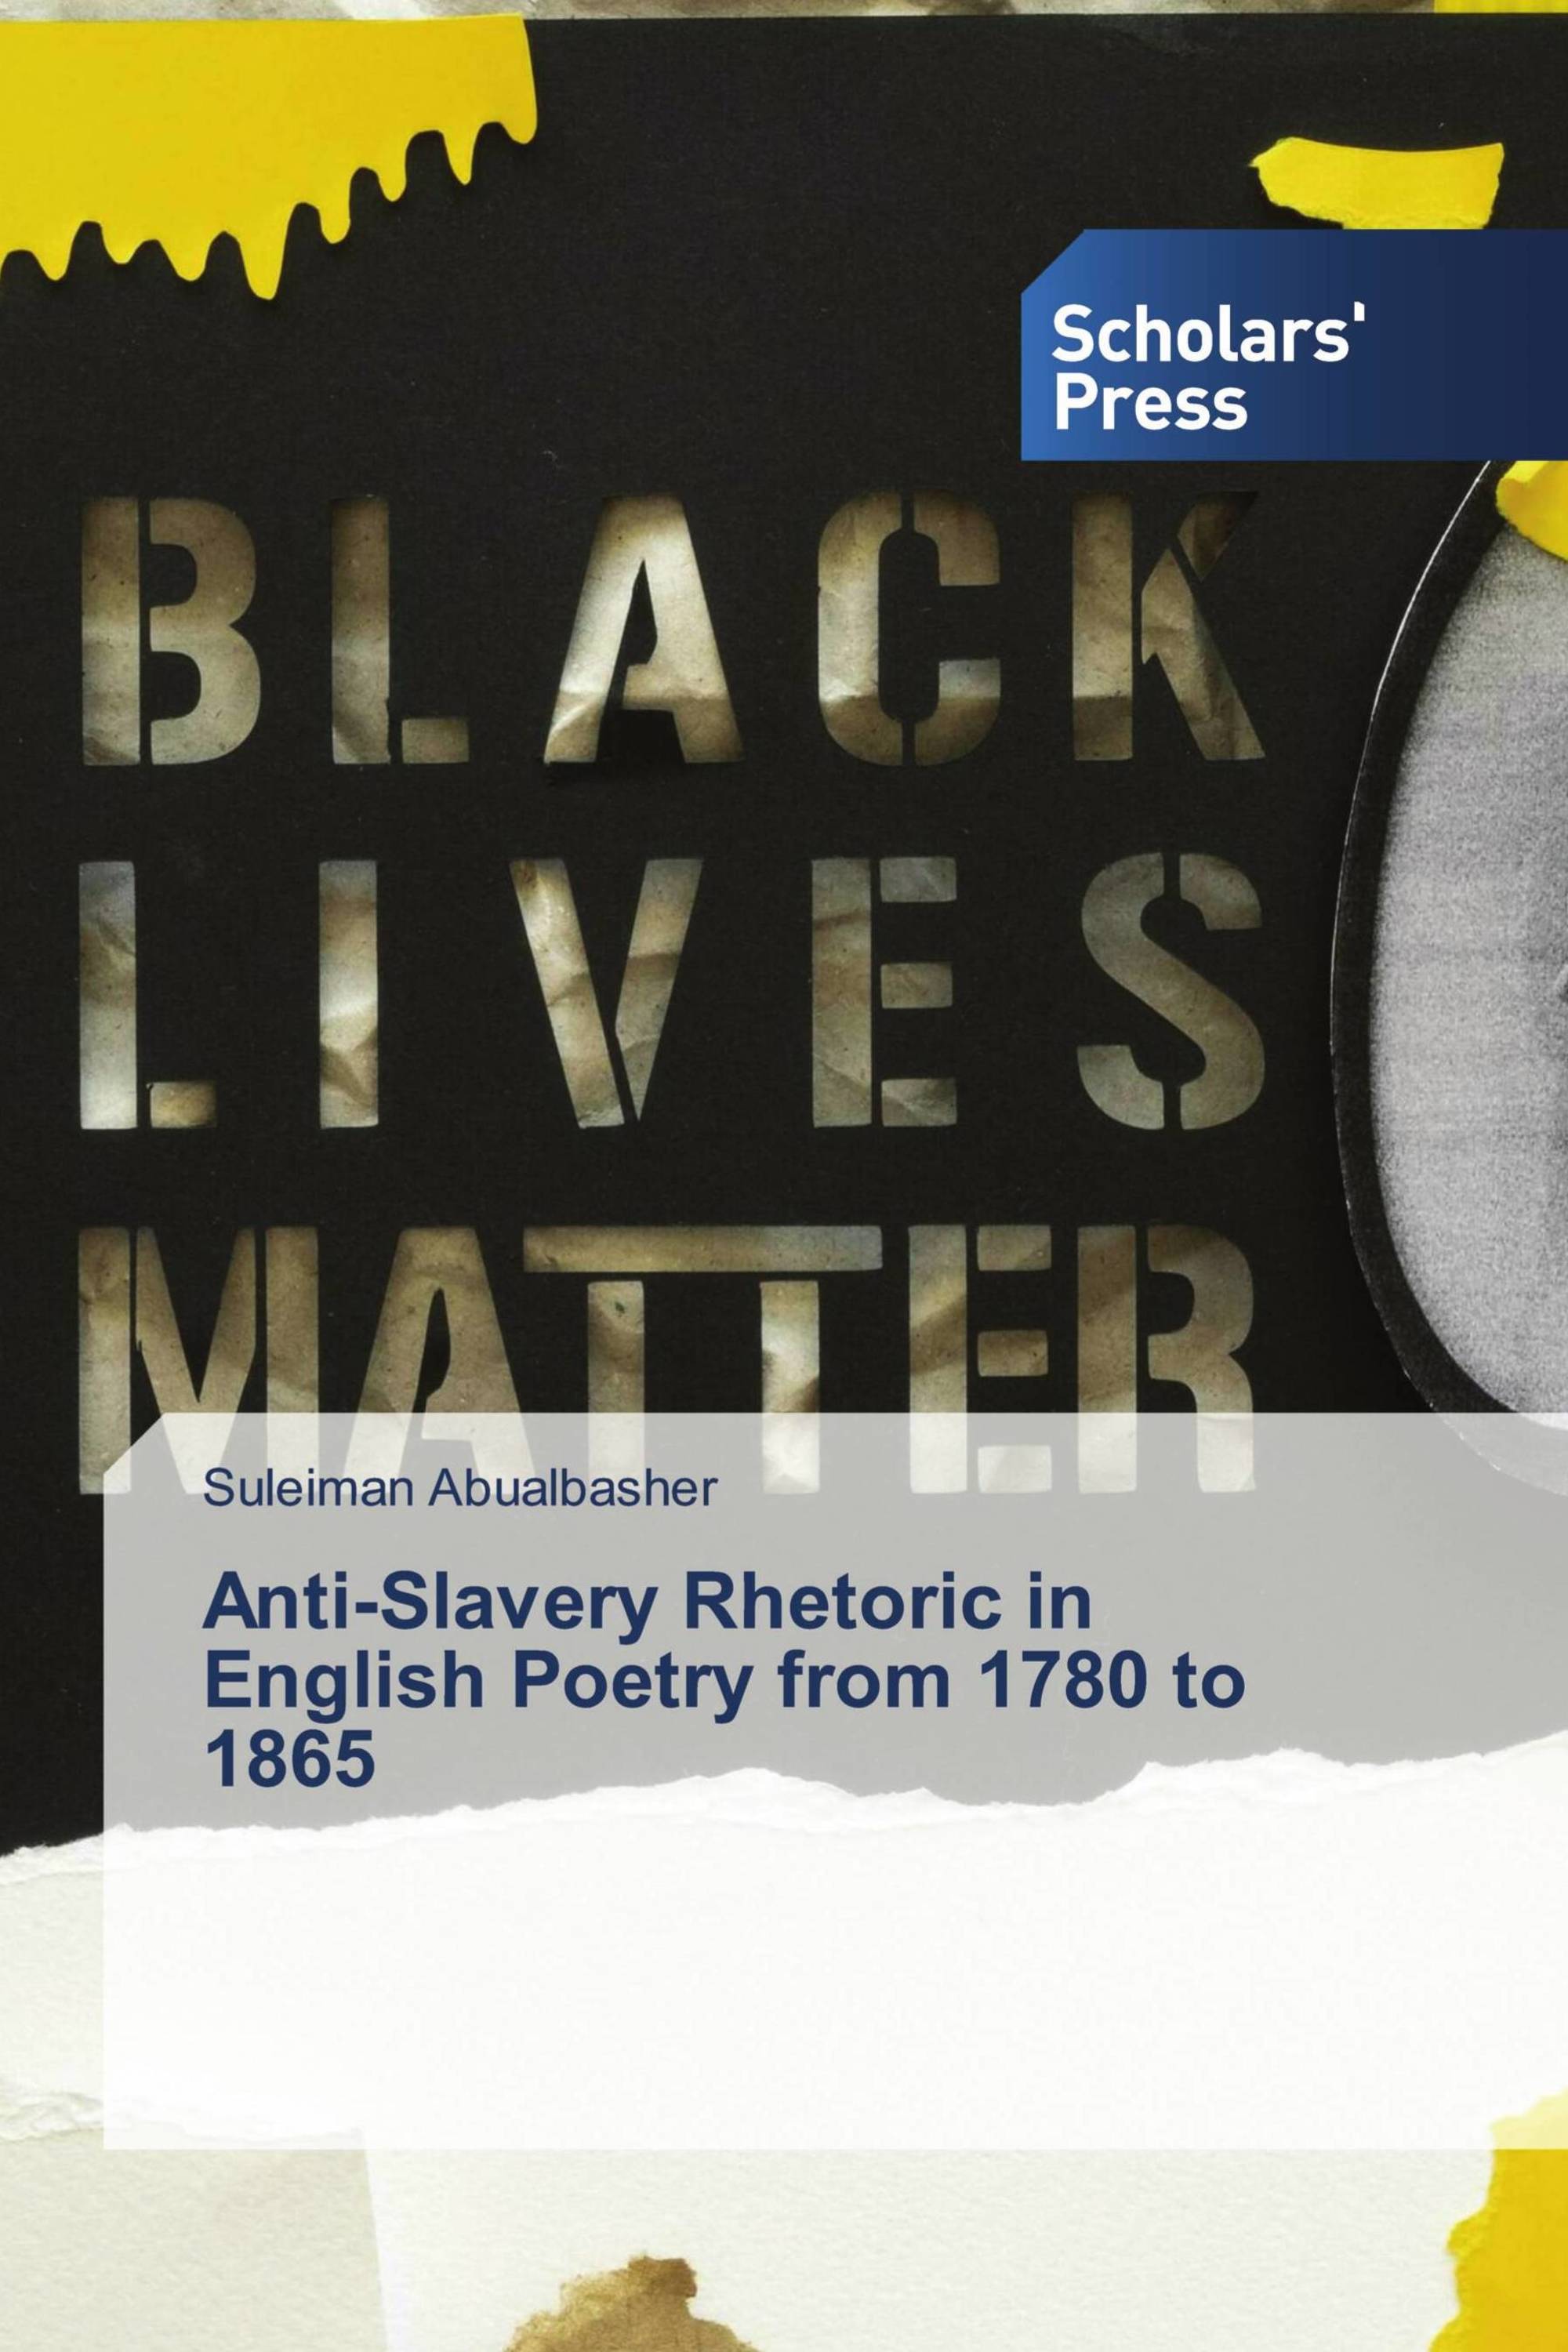 Anti-Slavery Rhetoric in English Poetry from 1780 to 1865